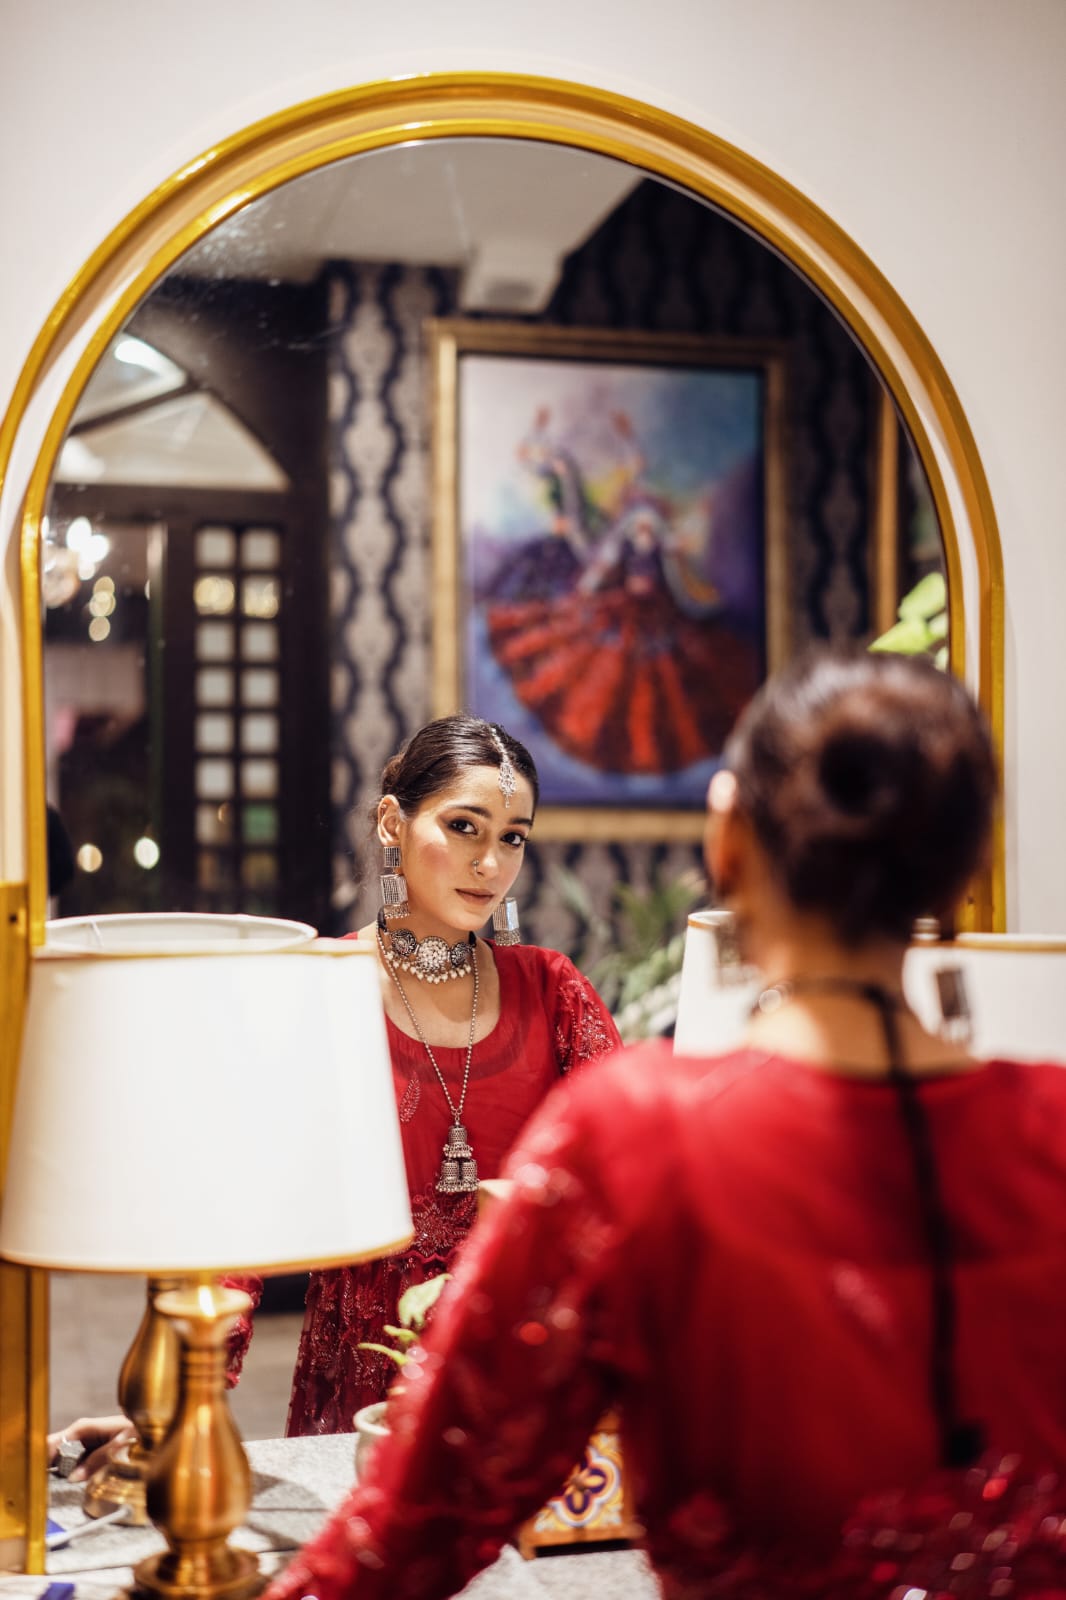 Observing herself in the mirror, she elegantly arranges the jewelry.